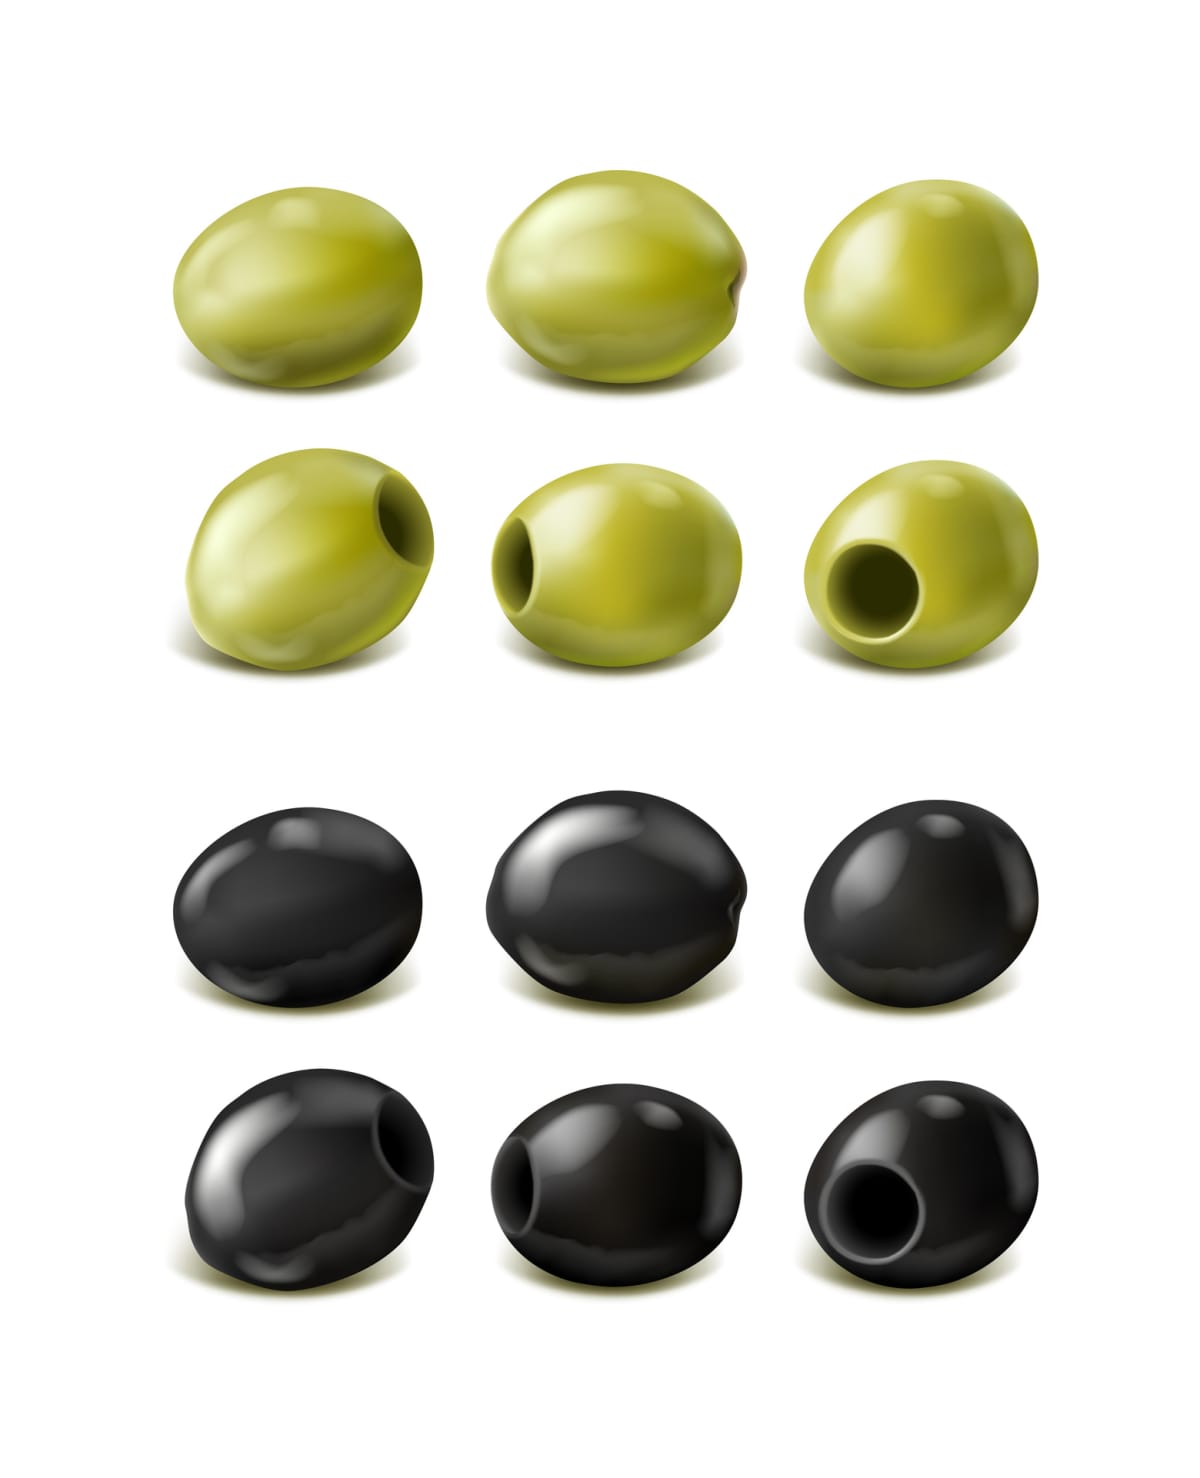 Green and black olives against a white background